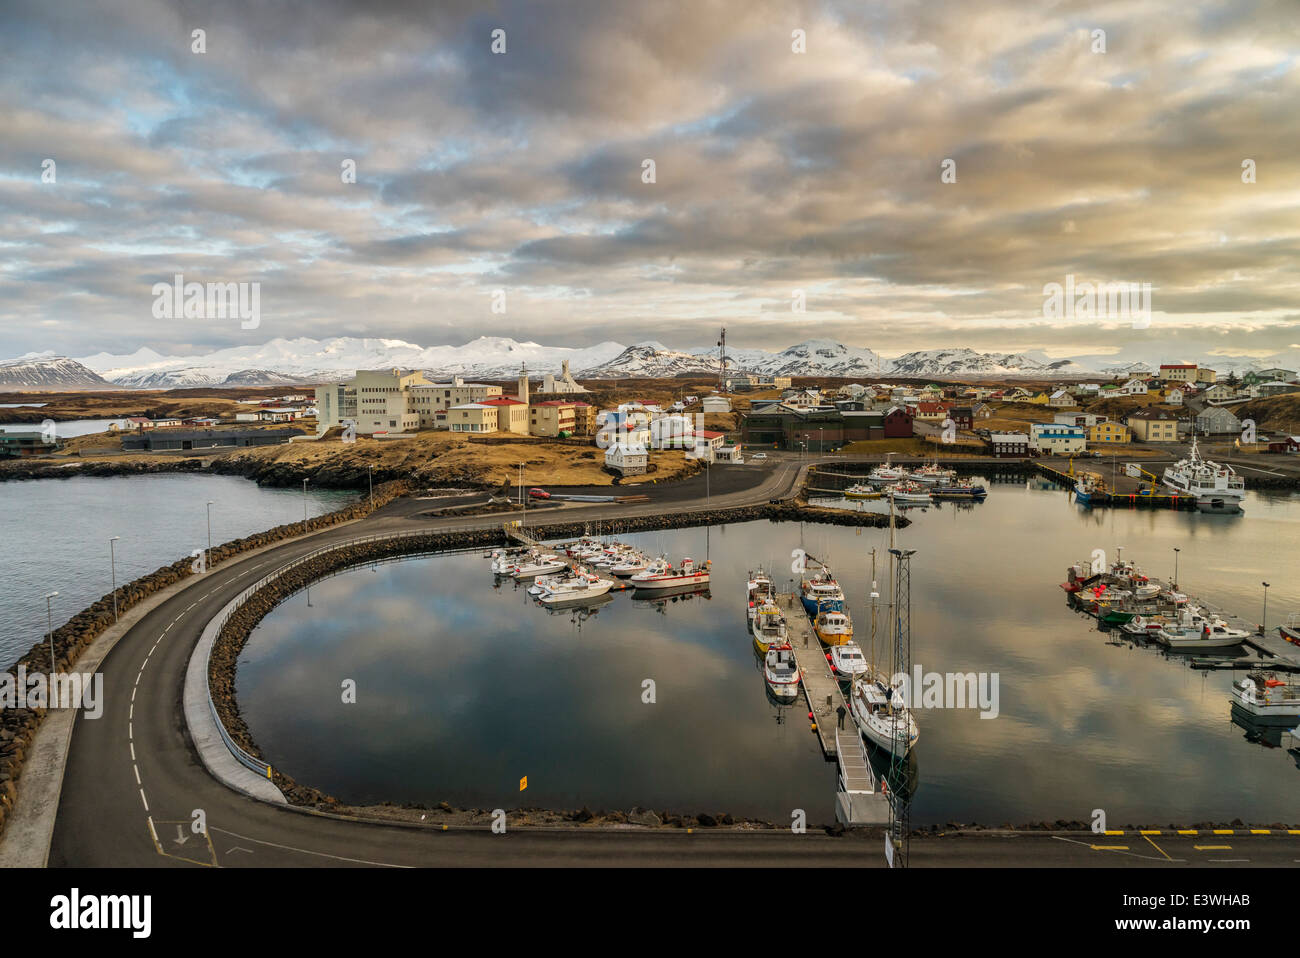 Top view of the harbor at Stykkisholmur, Snaefellsnes Peninsula, Iceland Stock Photo